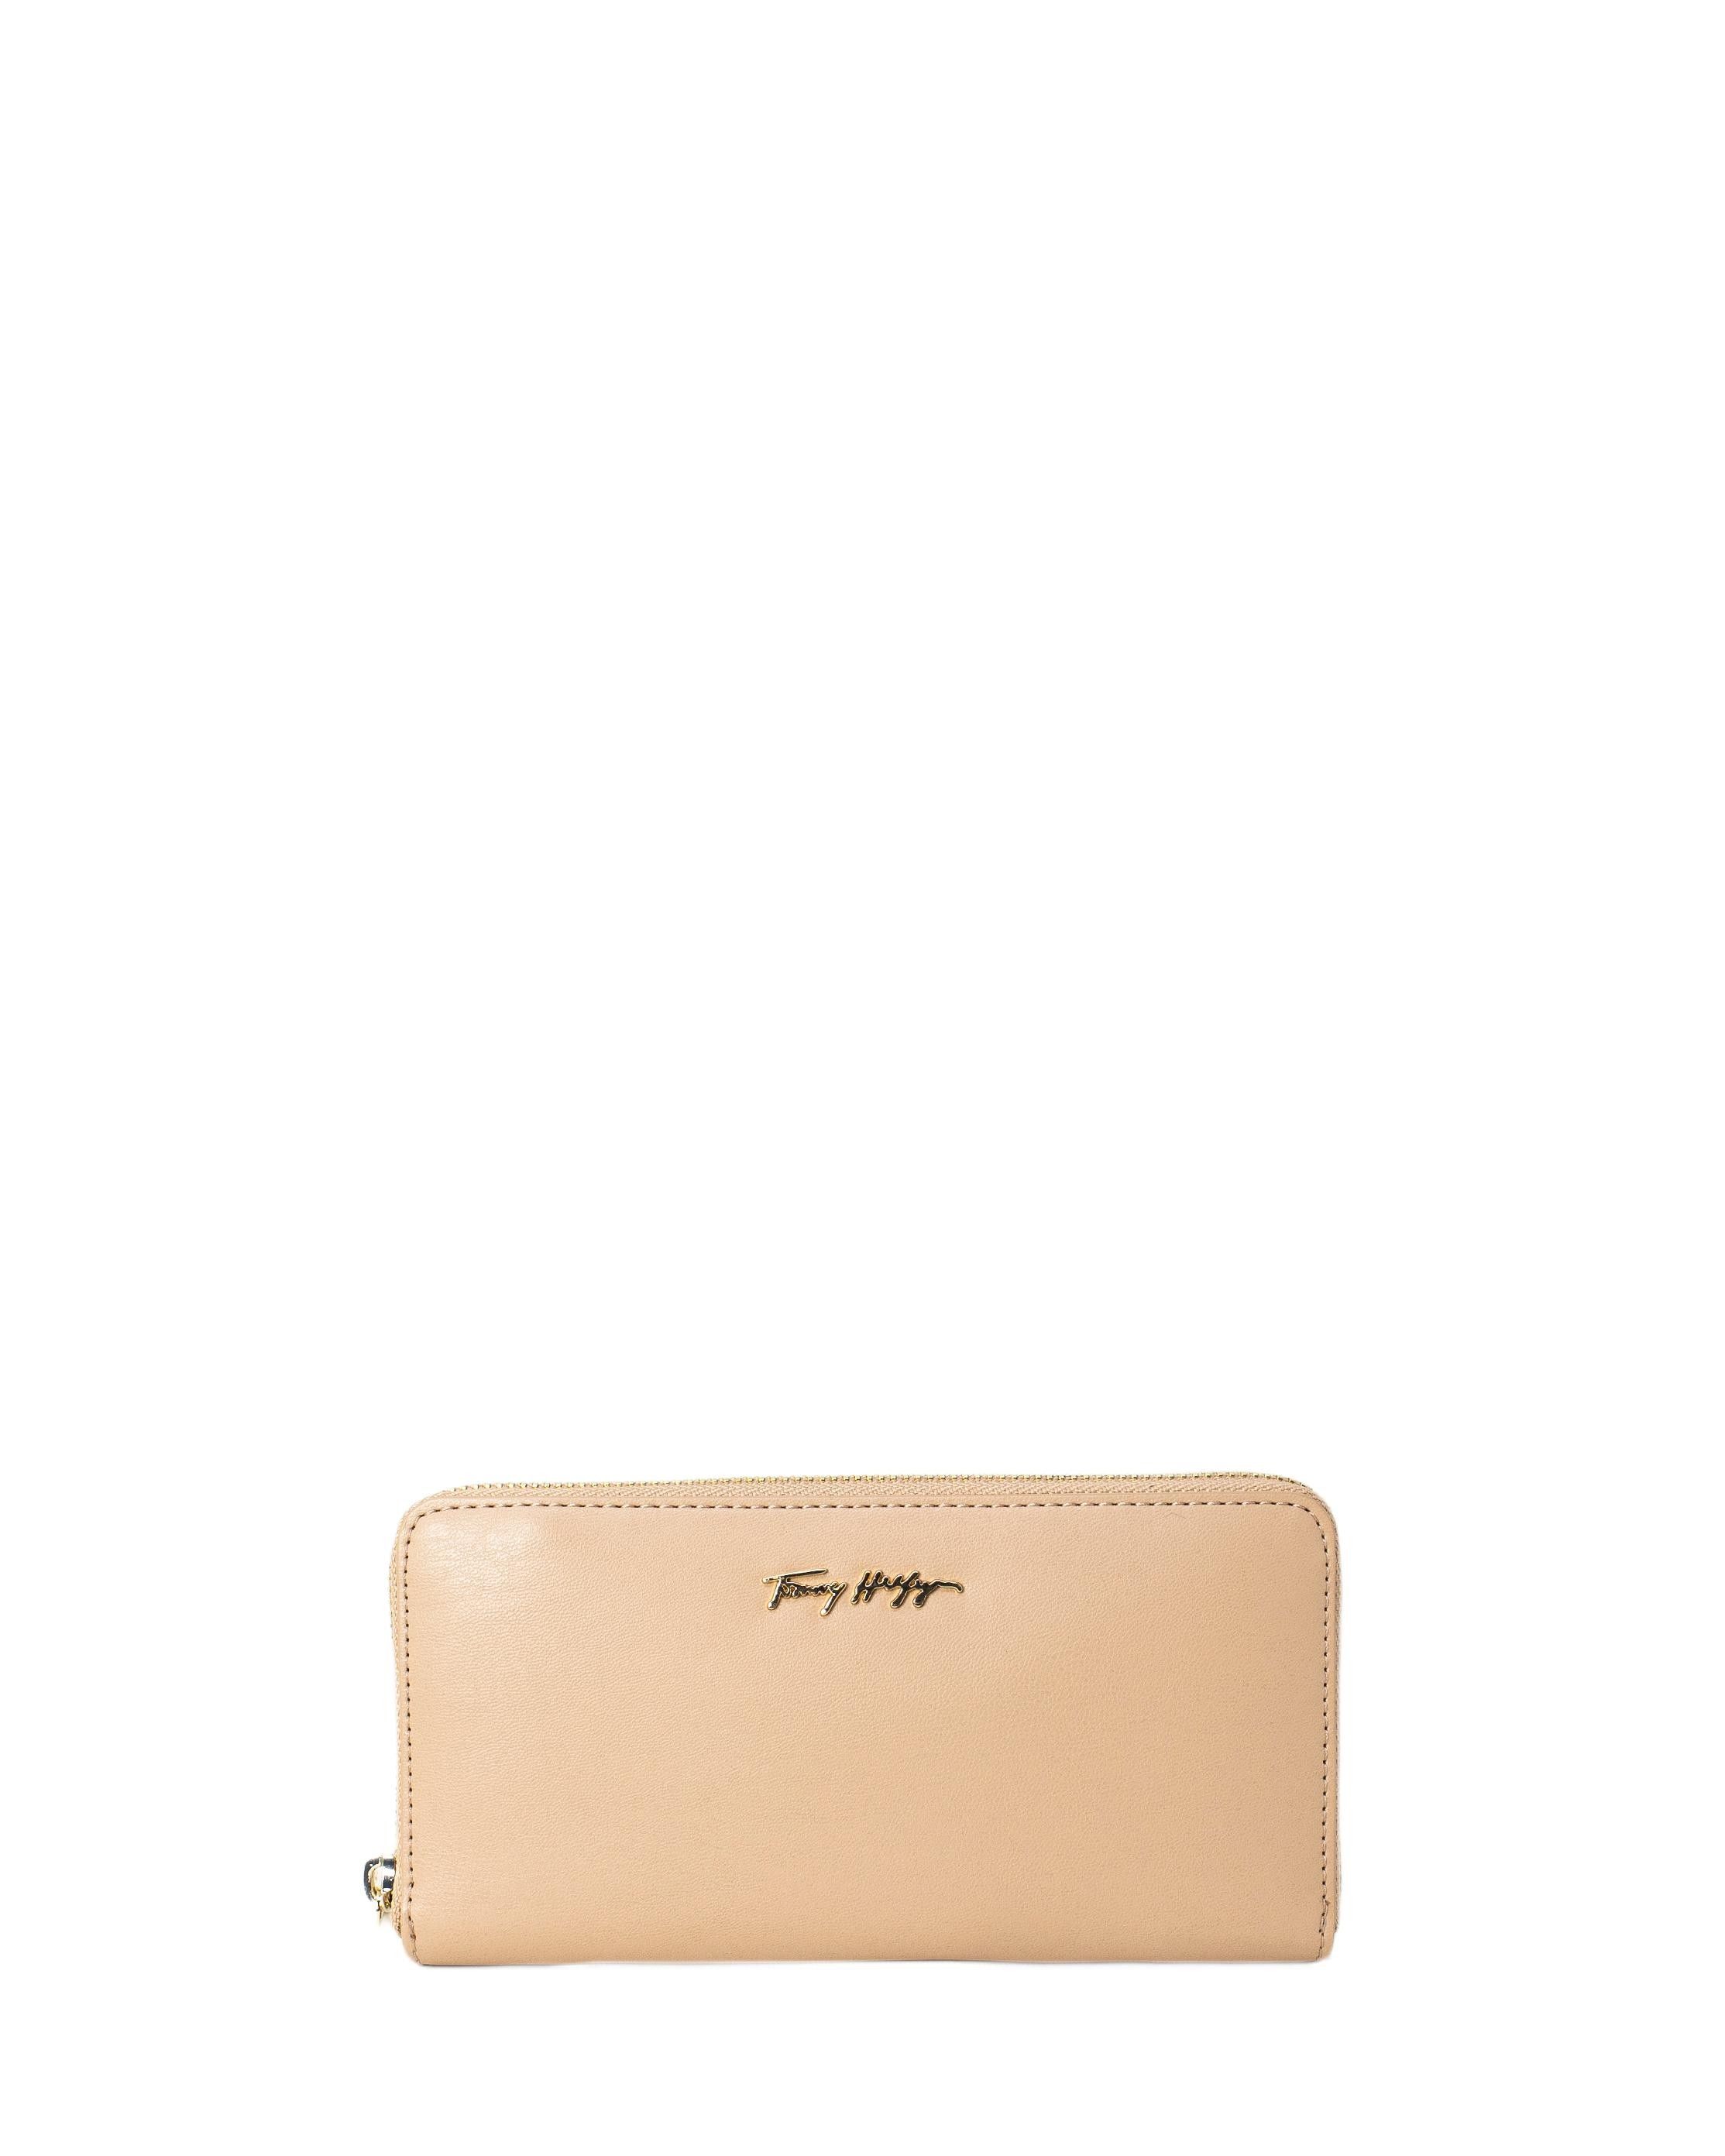 Brand: Tommy Hilfiger Gender: Women Type: Wallets Season: Spring/Summer  PRODUCT DETAIL • Color: pink • Pattern: plain • Fastening: with zip • Size (cm): 10.5x17x3.5 cm  COMPOSITION AND MATERIAL • Composition: -100%  polyurethane